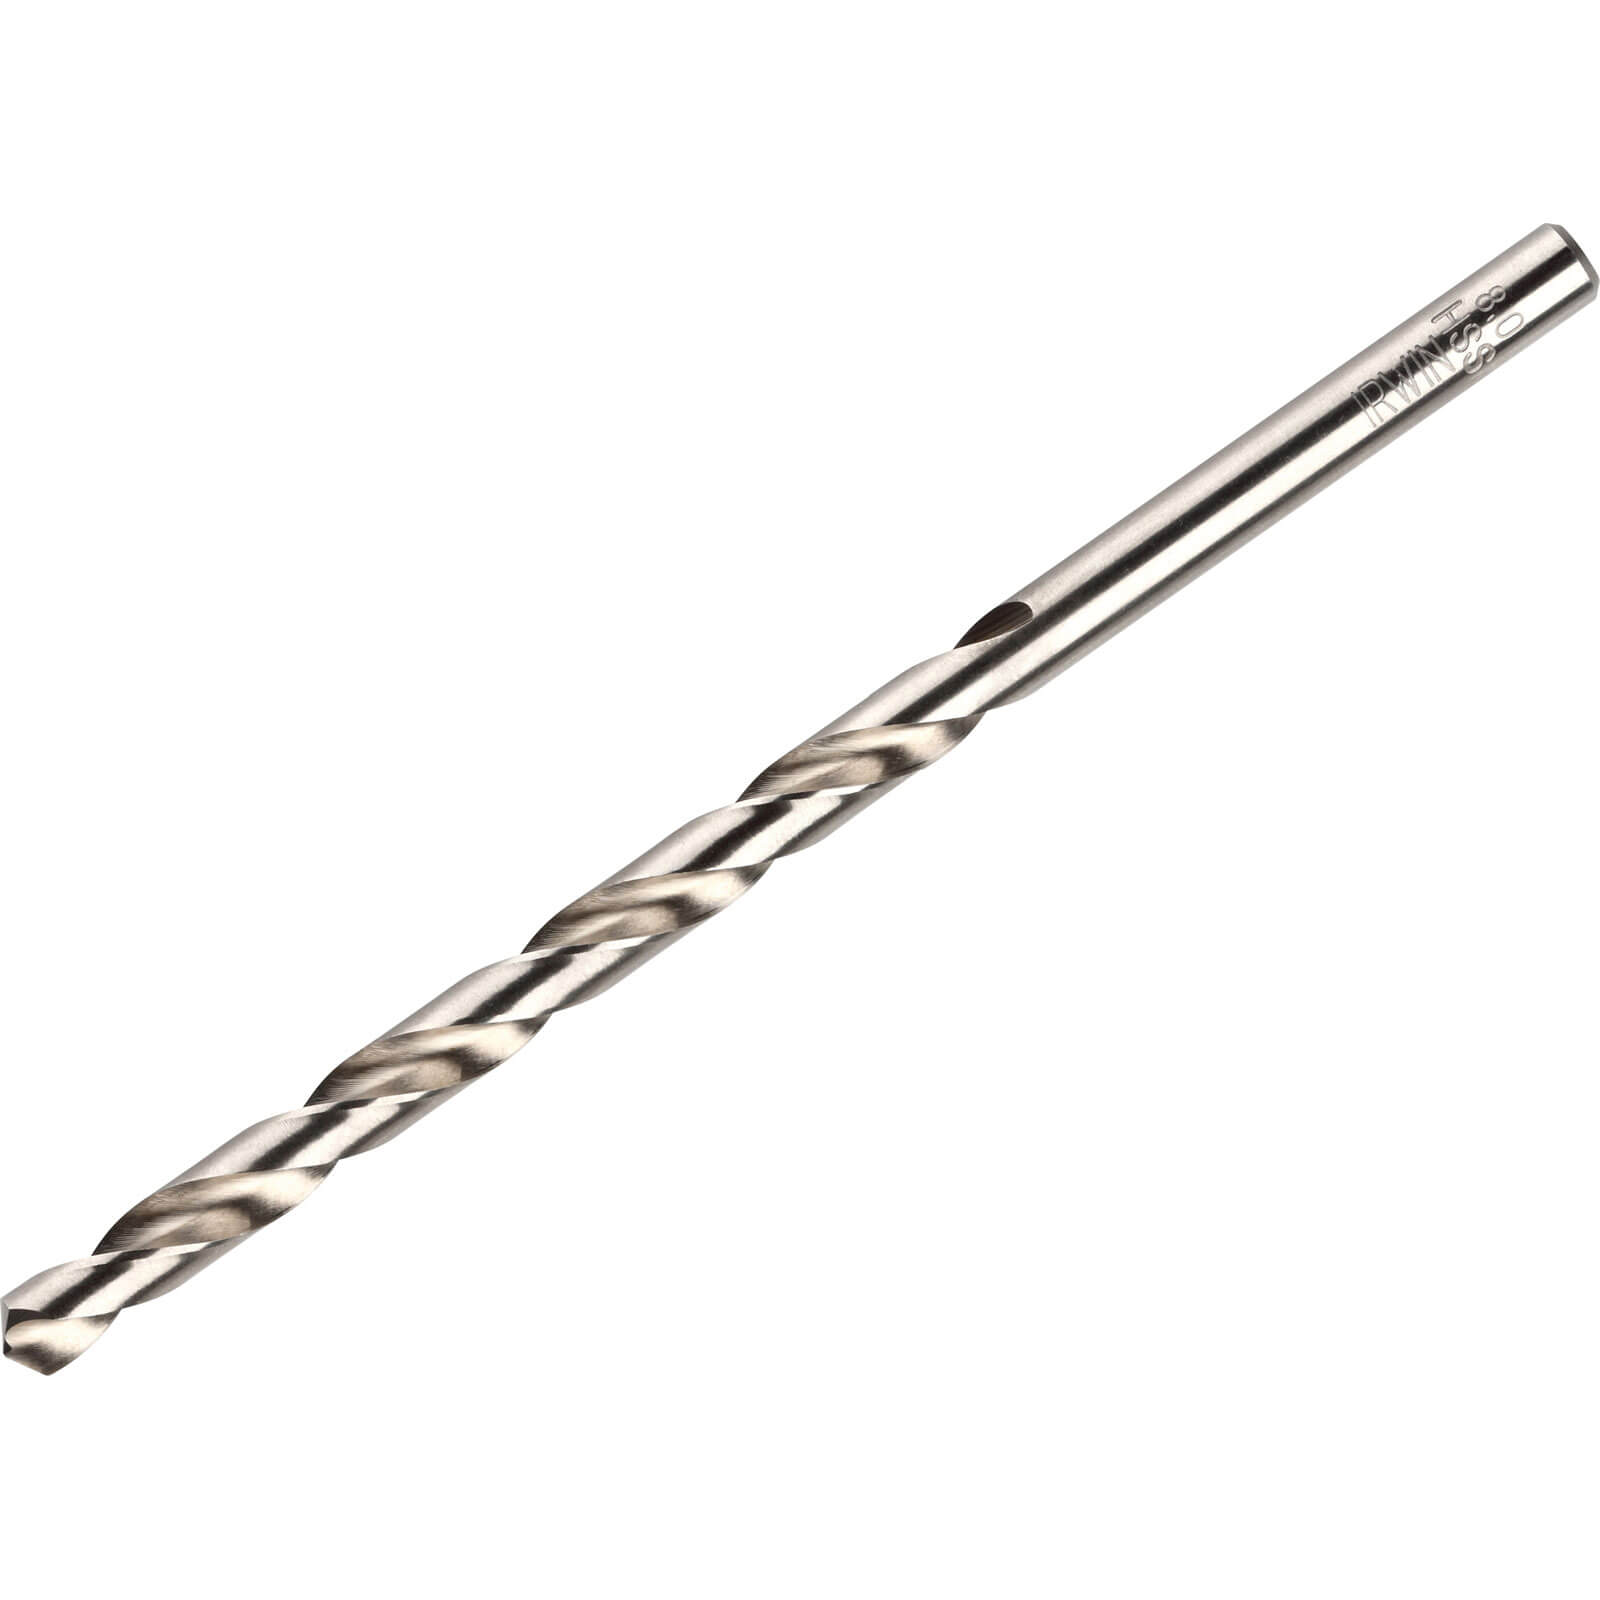 Photo of Irwin Hss Pro Drill Bits 6.5mm Pack Of 10